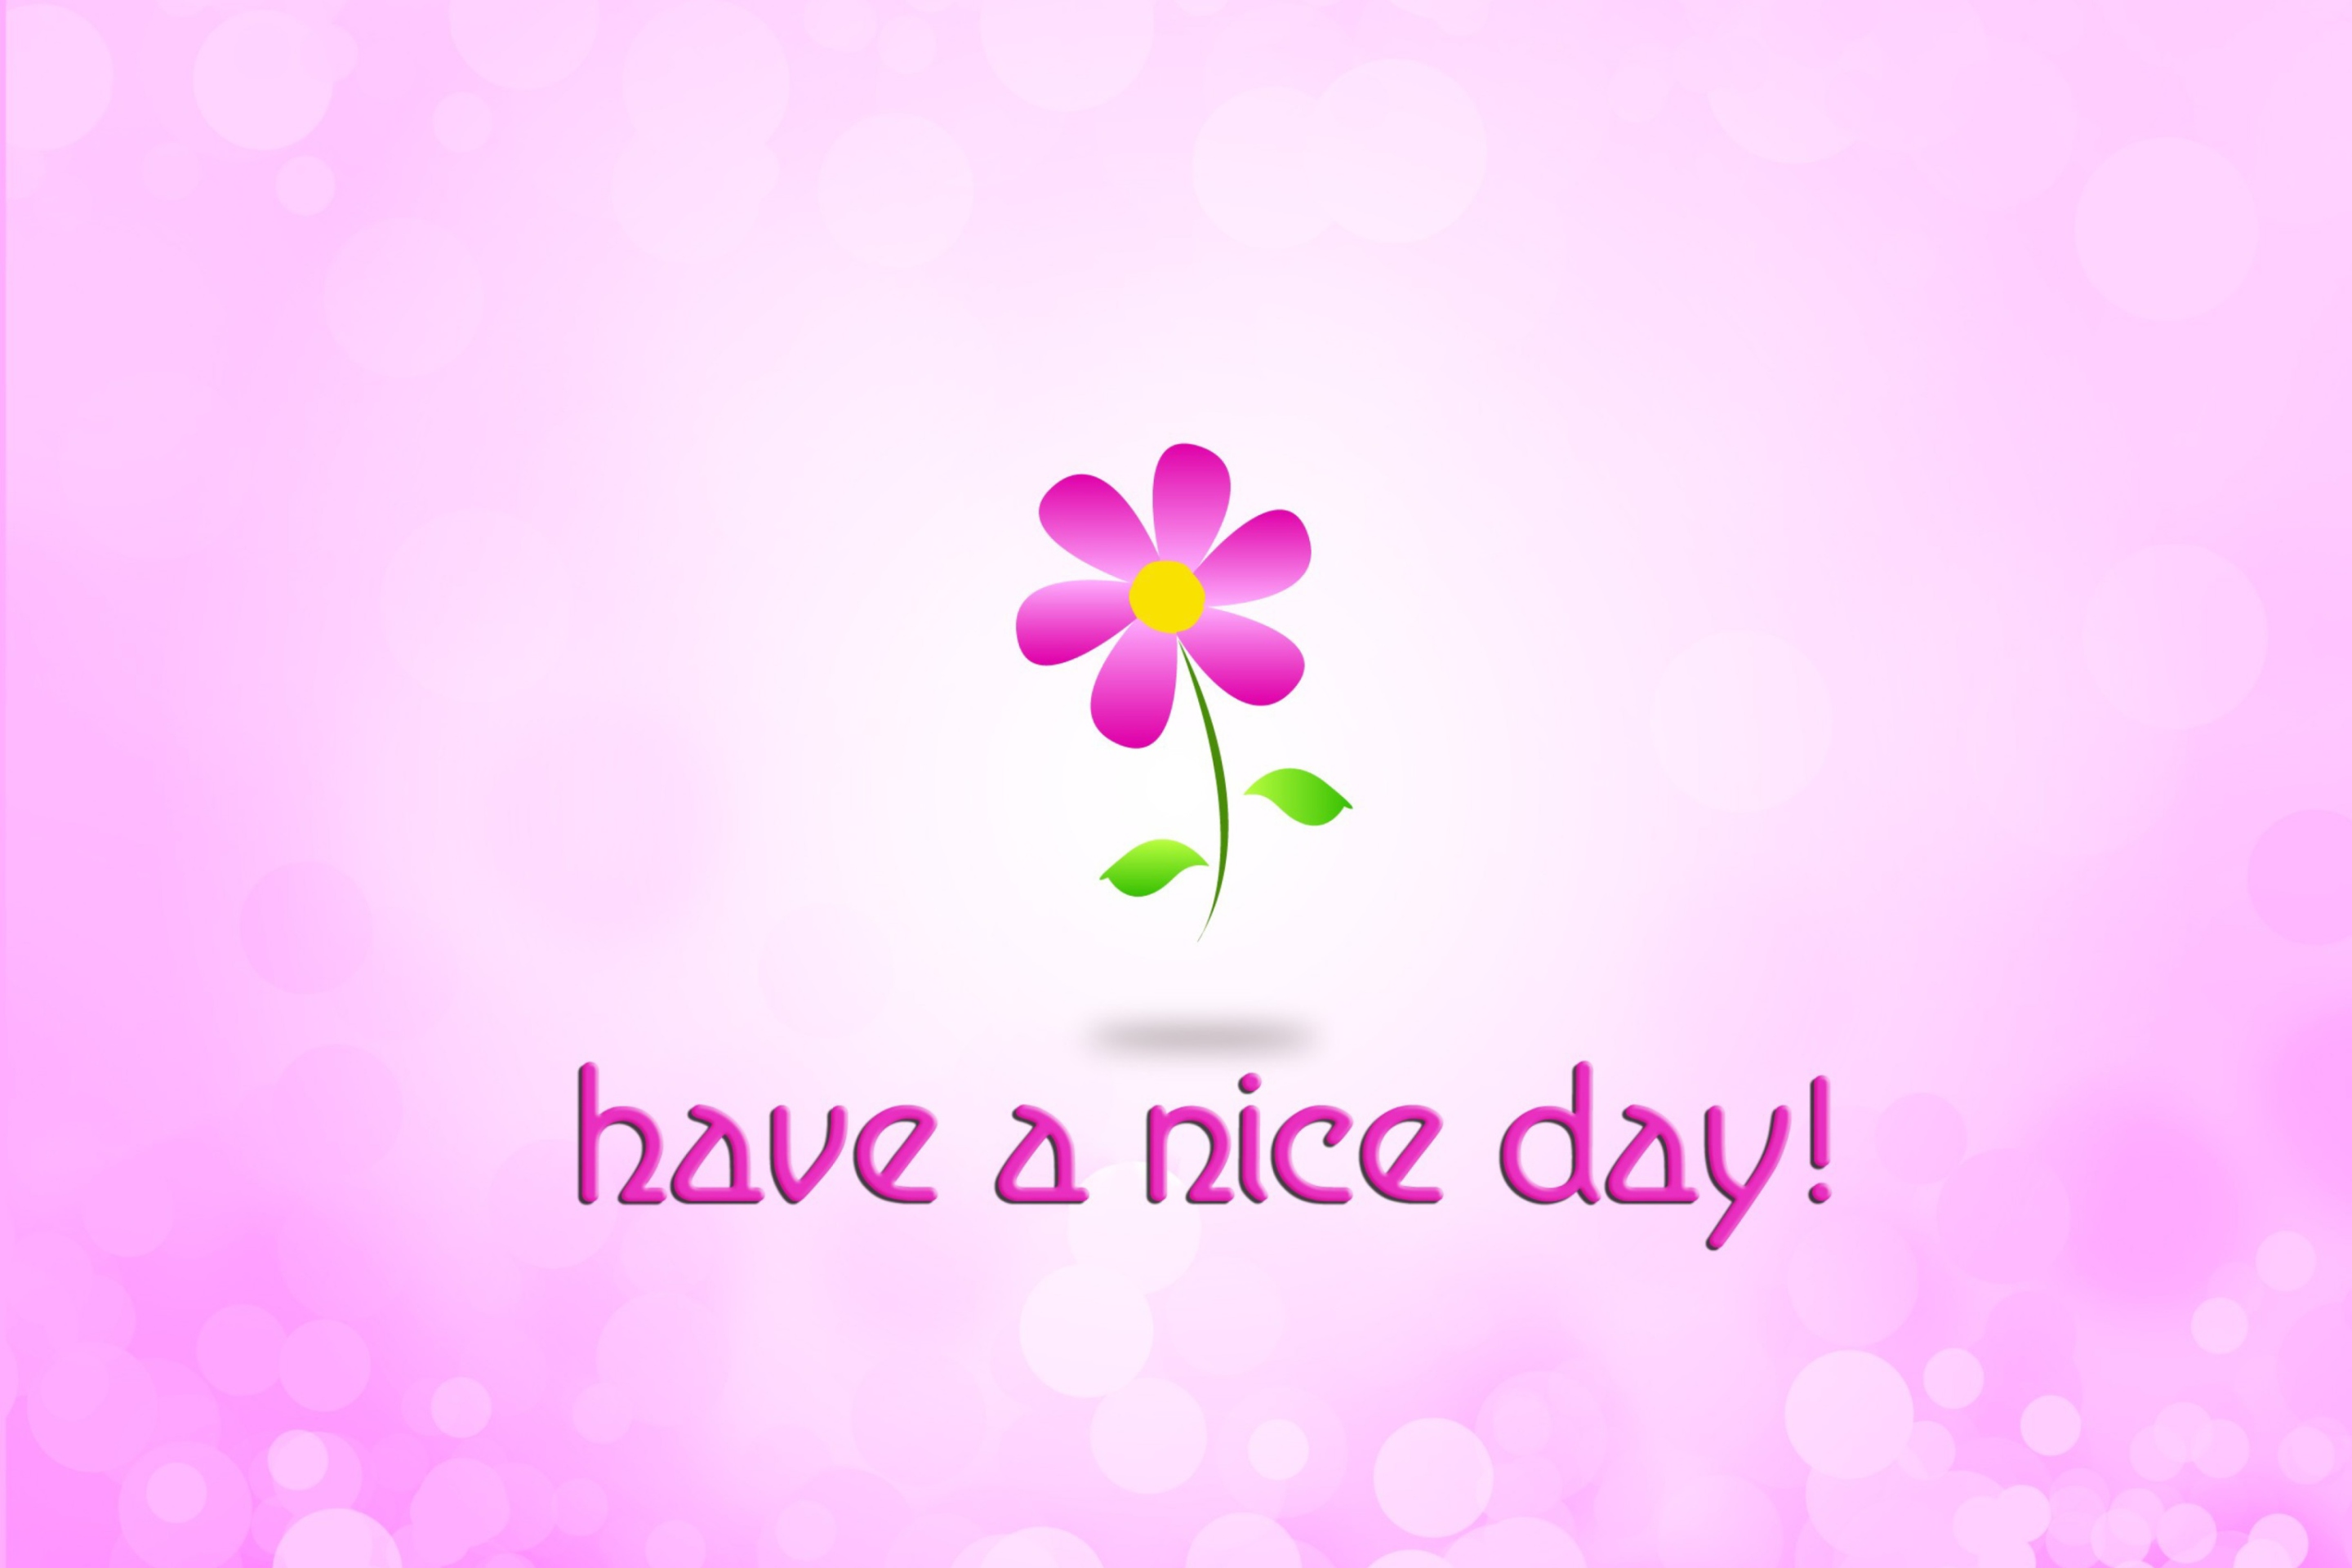 Have a Nice Day wallpaper 2880x1920